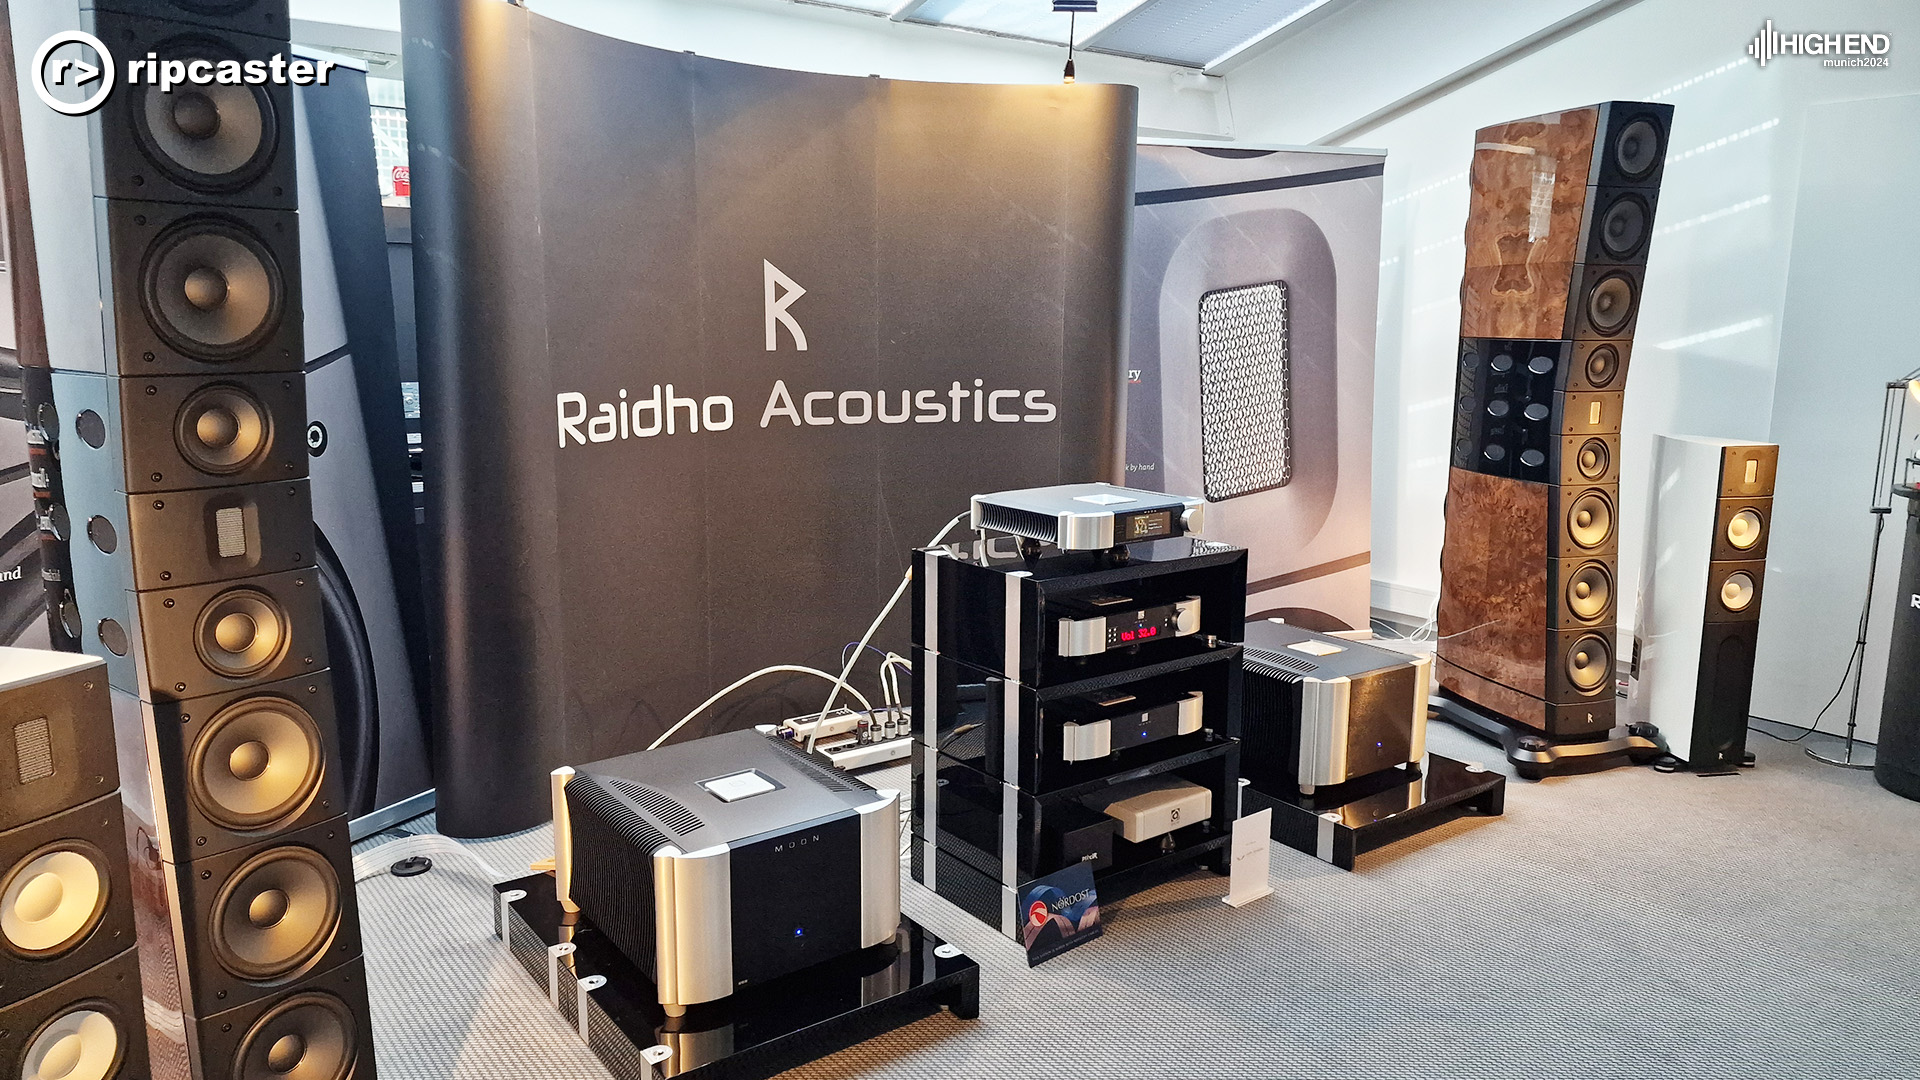 Raidho Acoustics.  There is MOON equipment between two very large speakers in a shiny, burl finish.  Either side of these two speakers are white Raidho speakers.